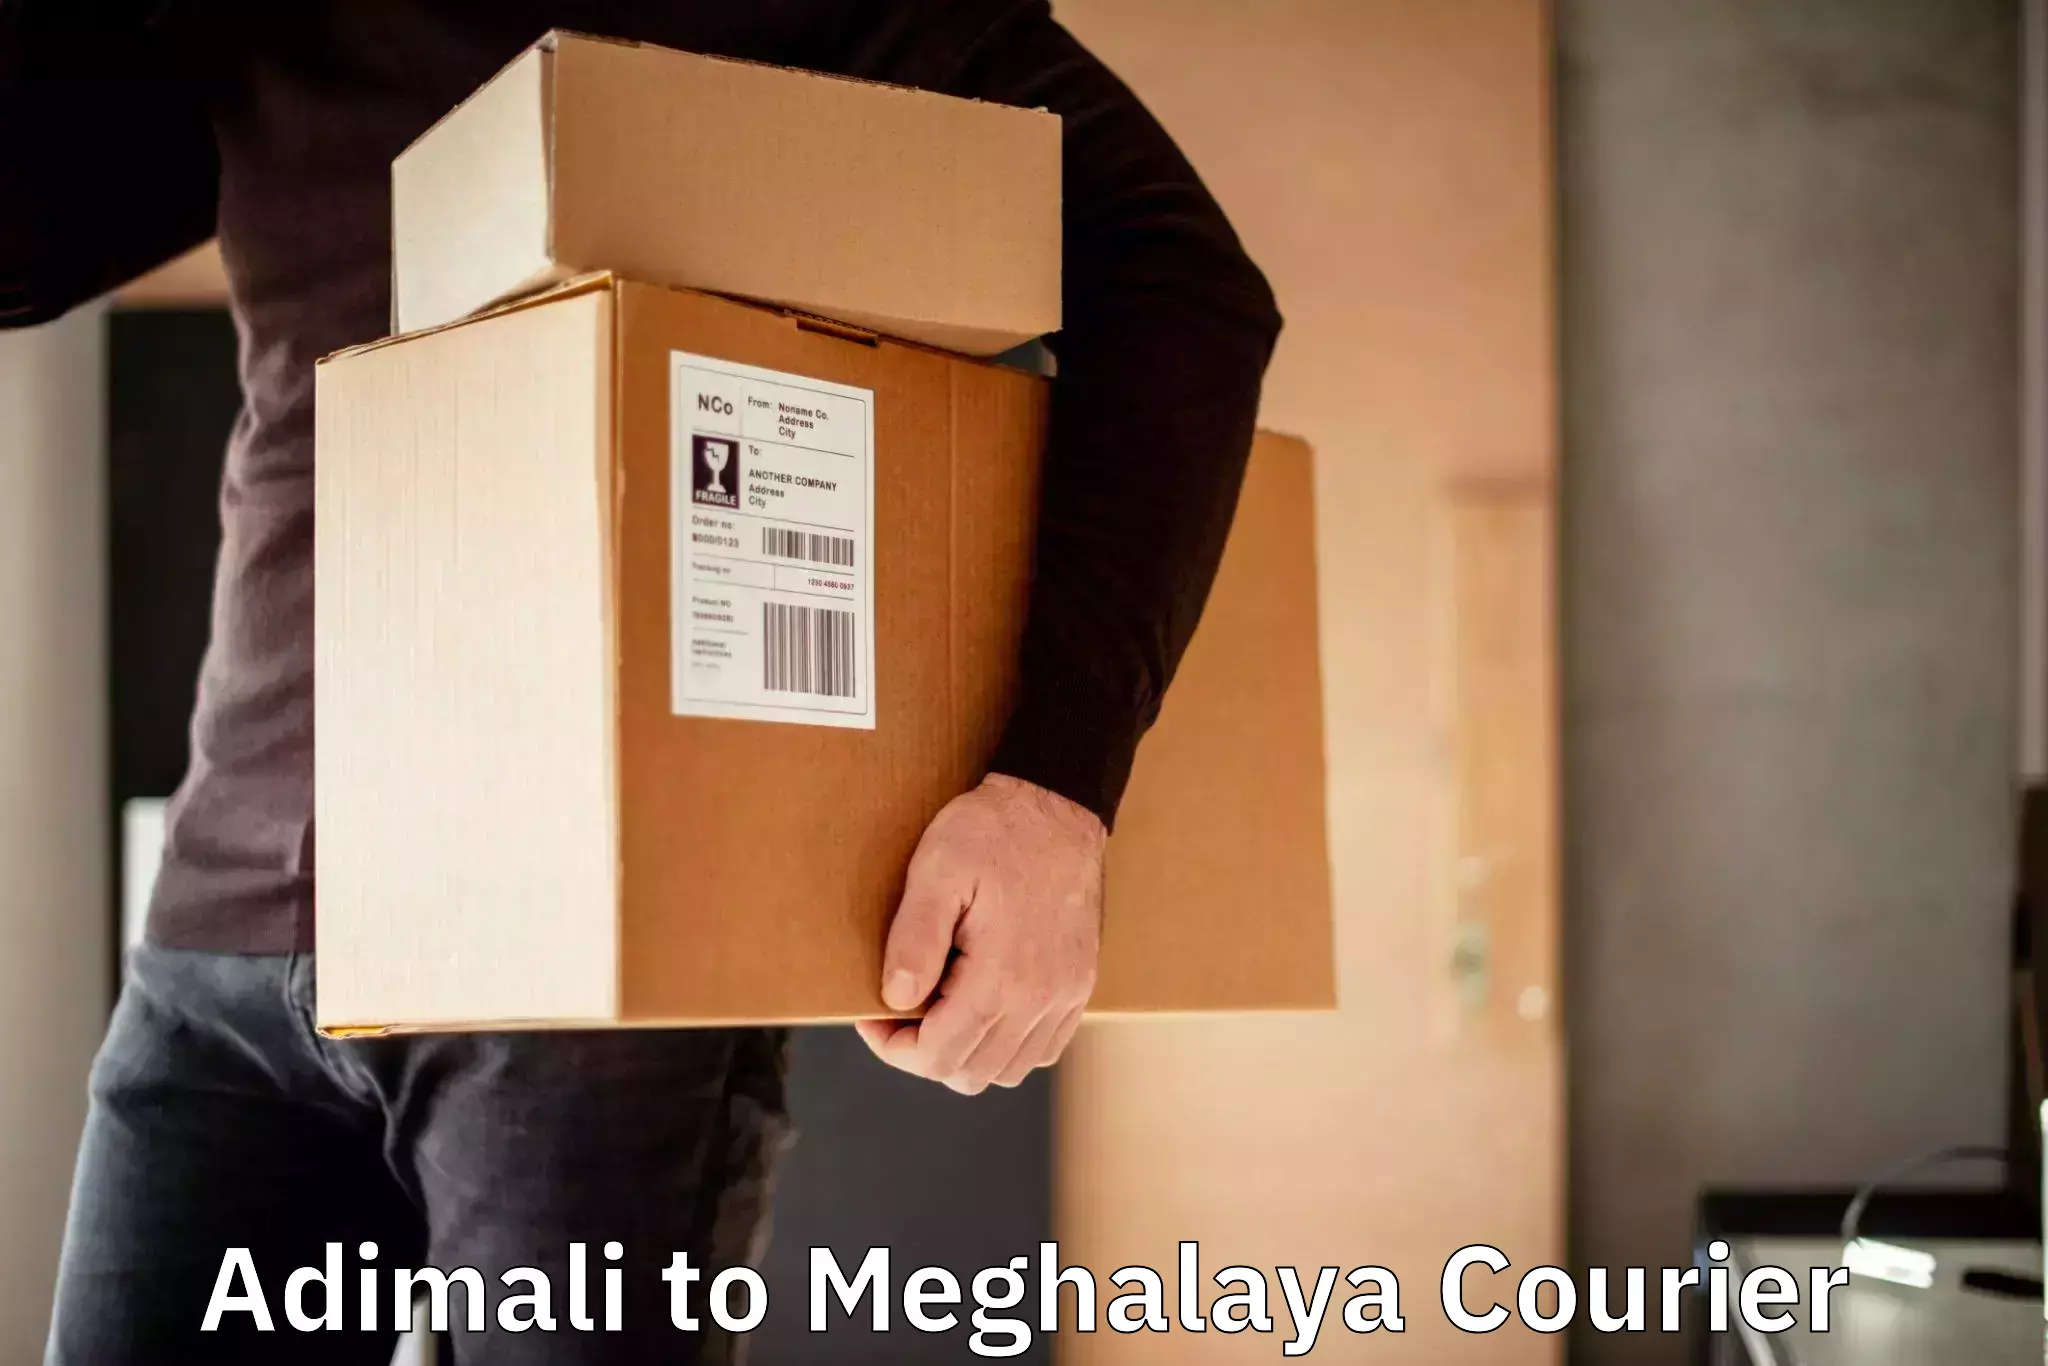 High-quality delivery services Adimali to Shillong